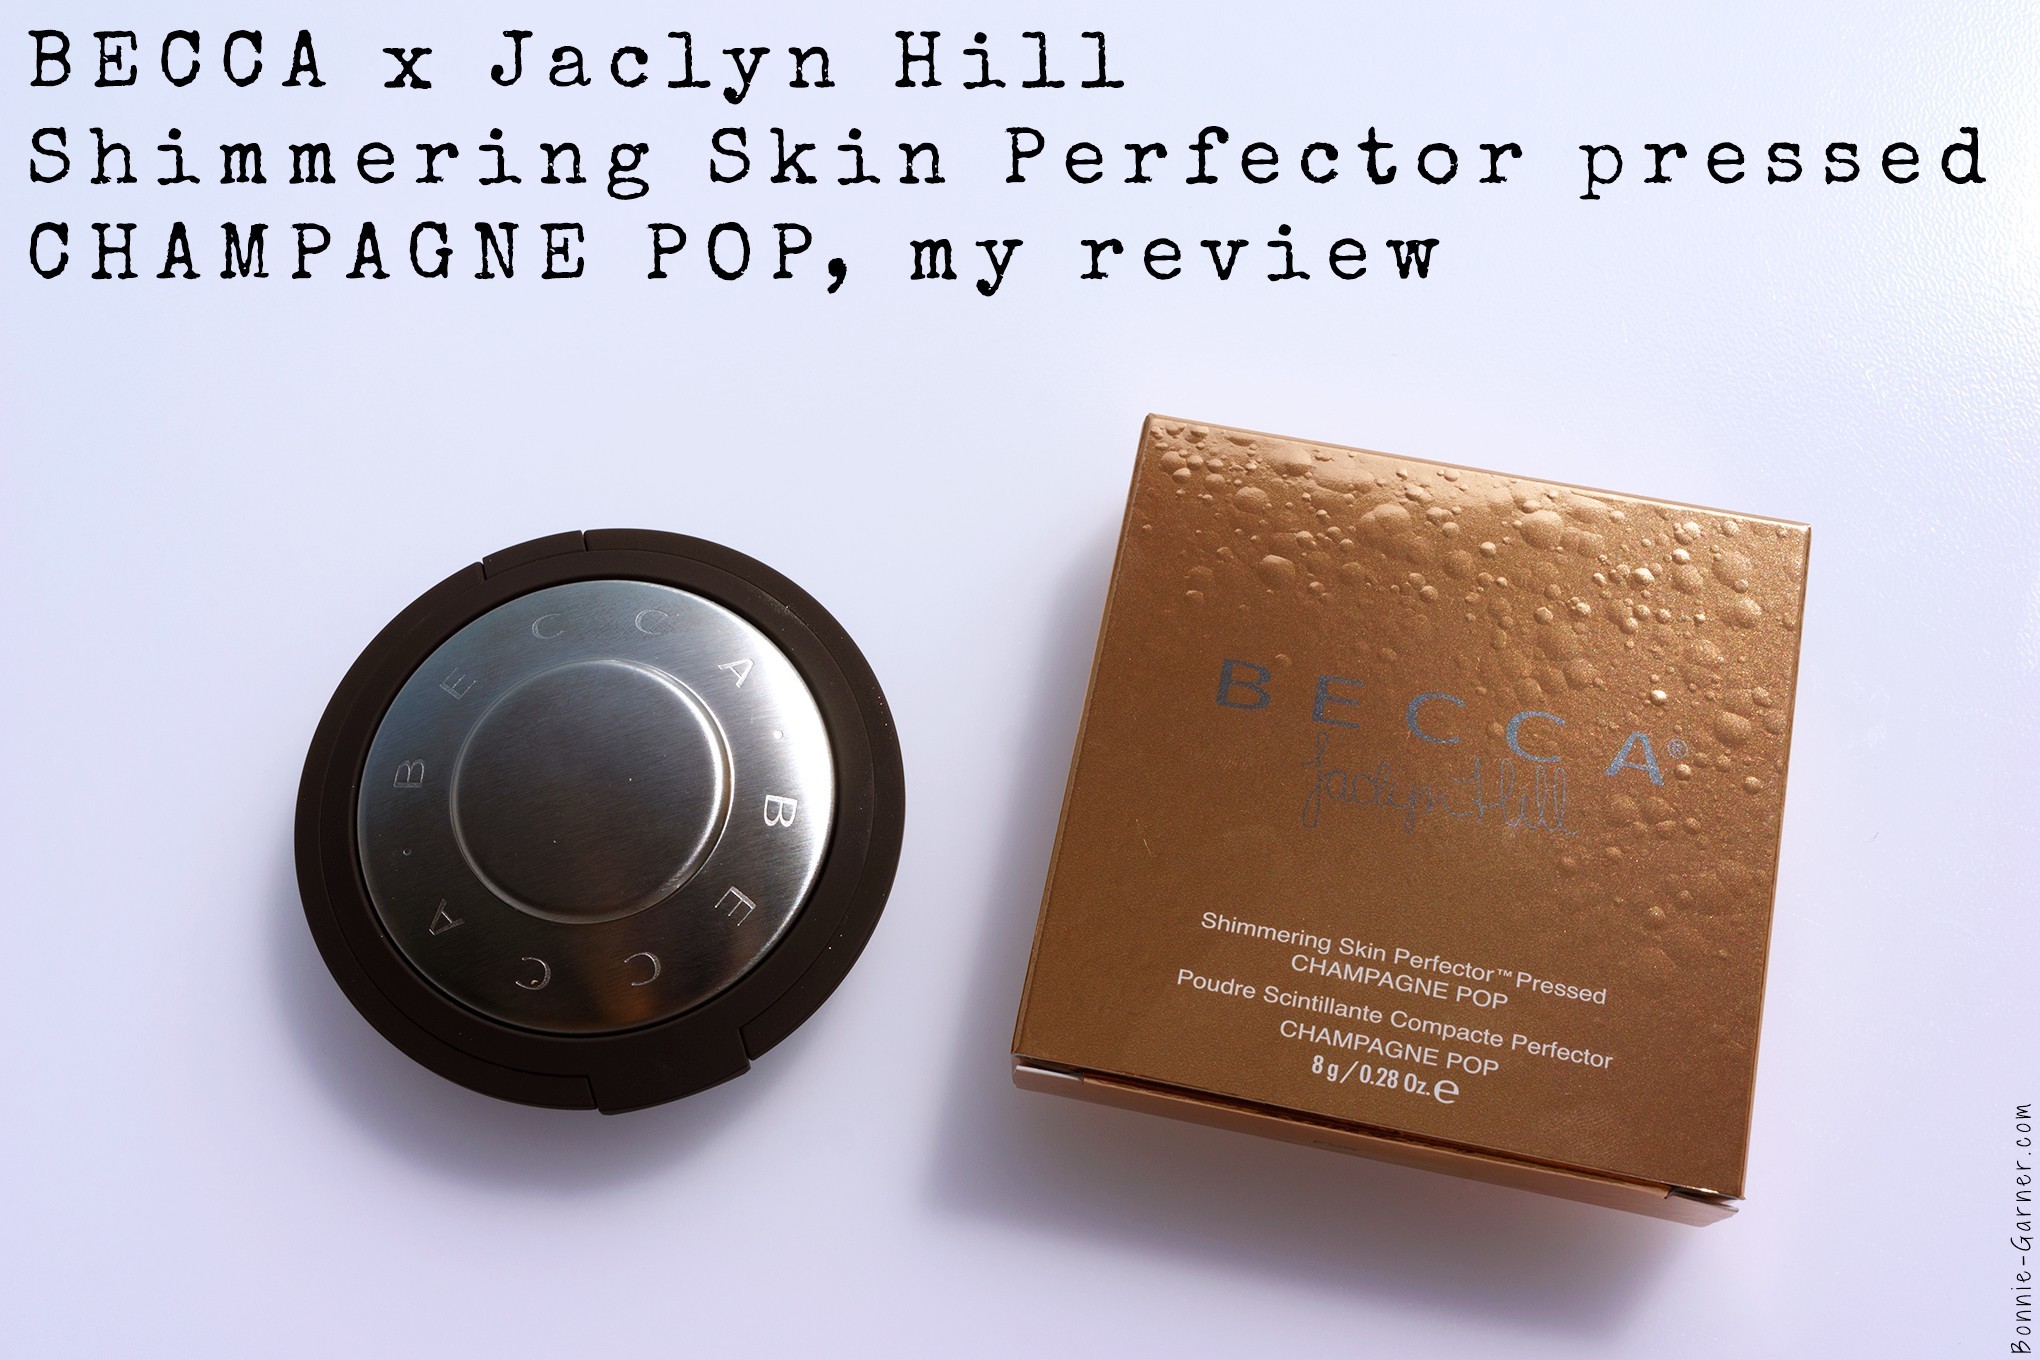 Becca x Jaclyn Hill Shimmering Skin Perfector Pressed Champagne Pop my review